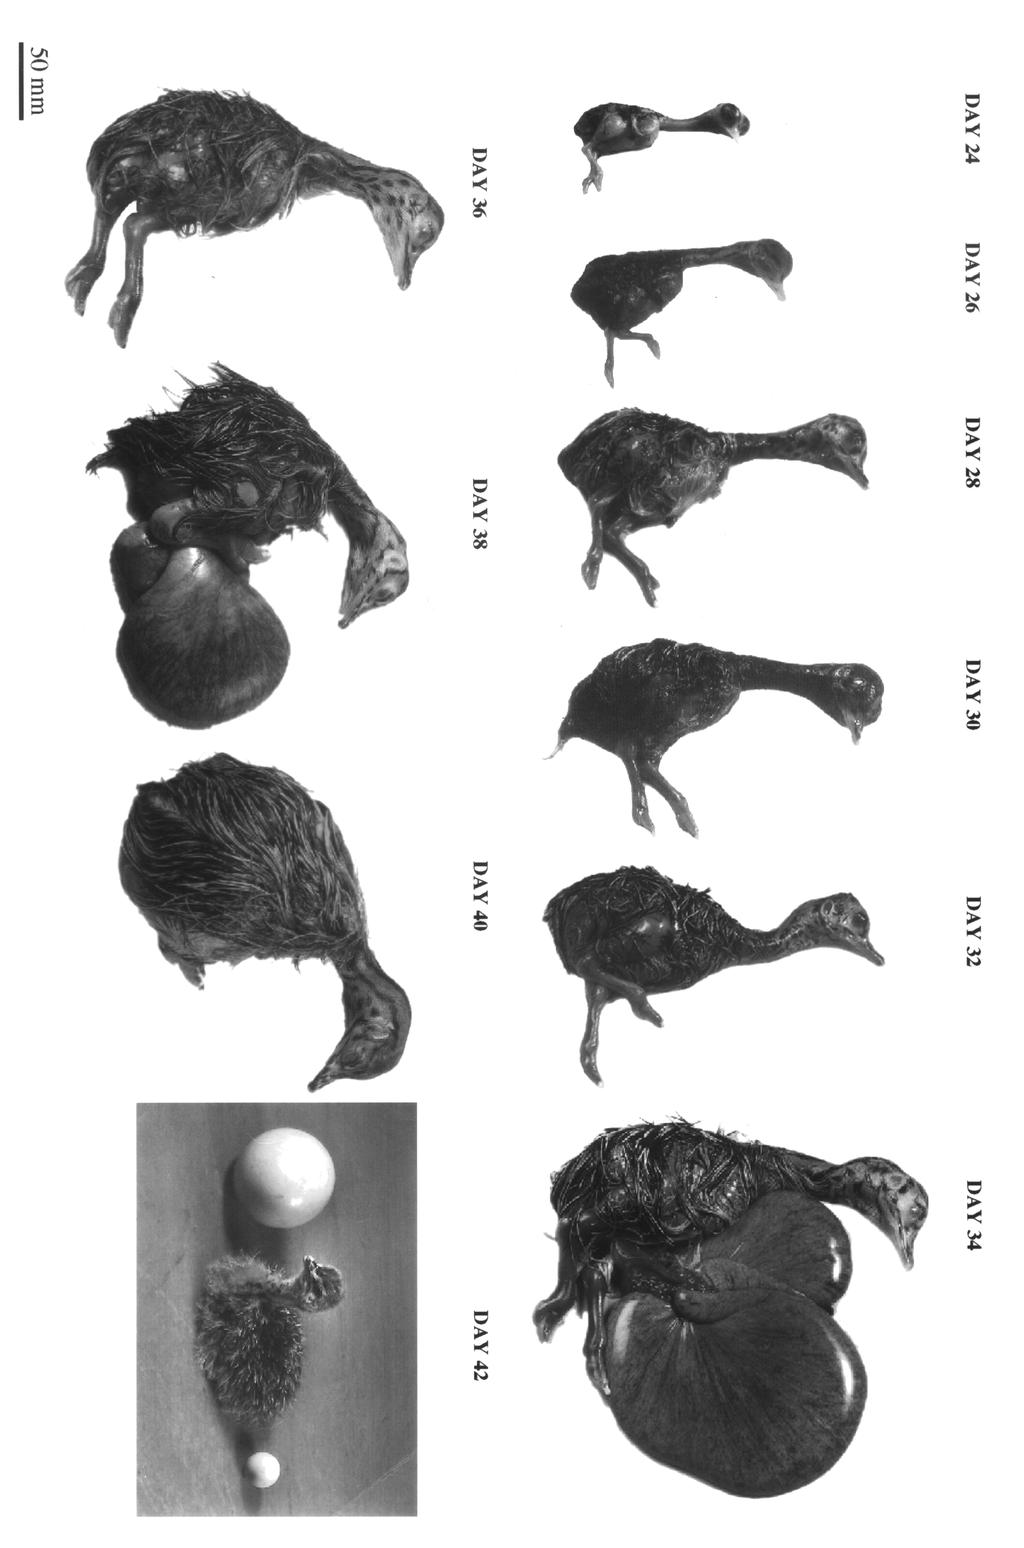 Fig. 1. Photographs of ostrich embryos throughout development, in two-day intervals. Scale bars are marked individually for embryos aged 4 22 days (dark background).